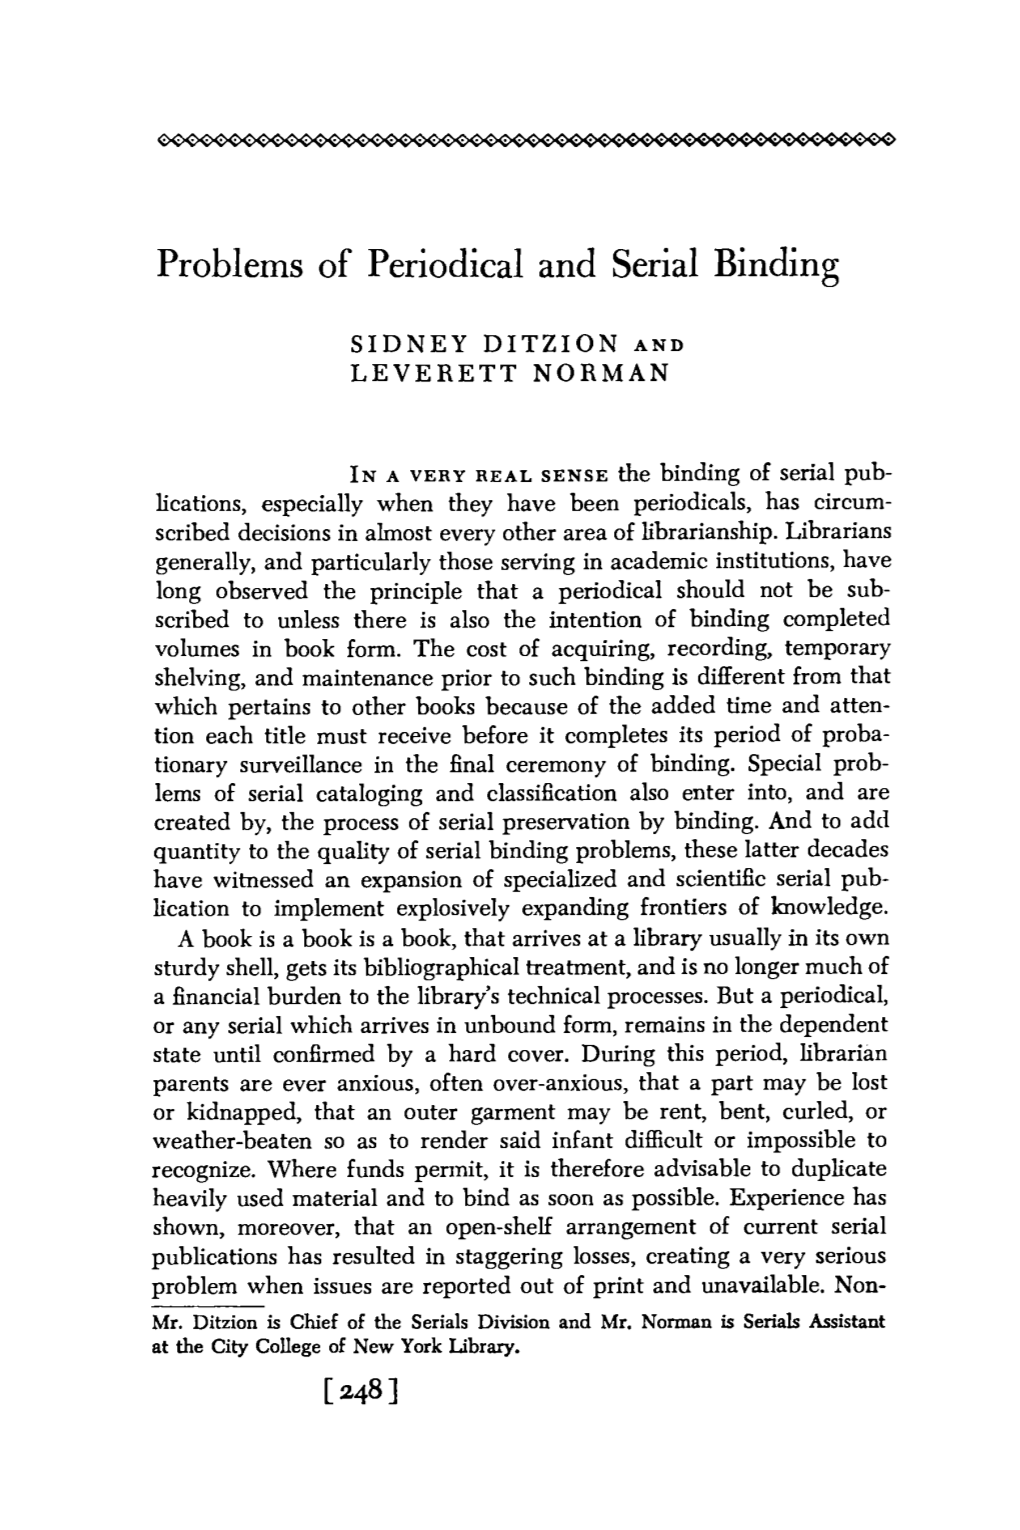 Problems of Periodical and Serial Binding